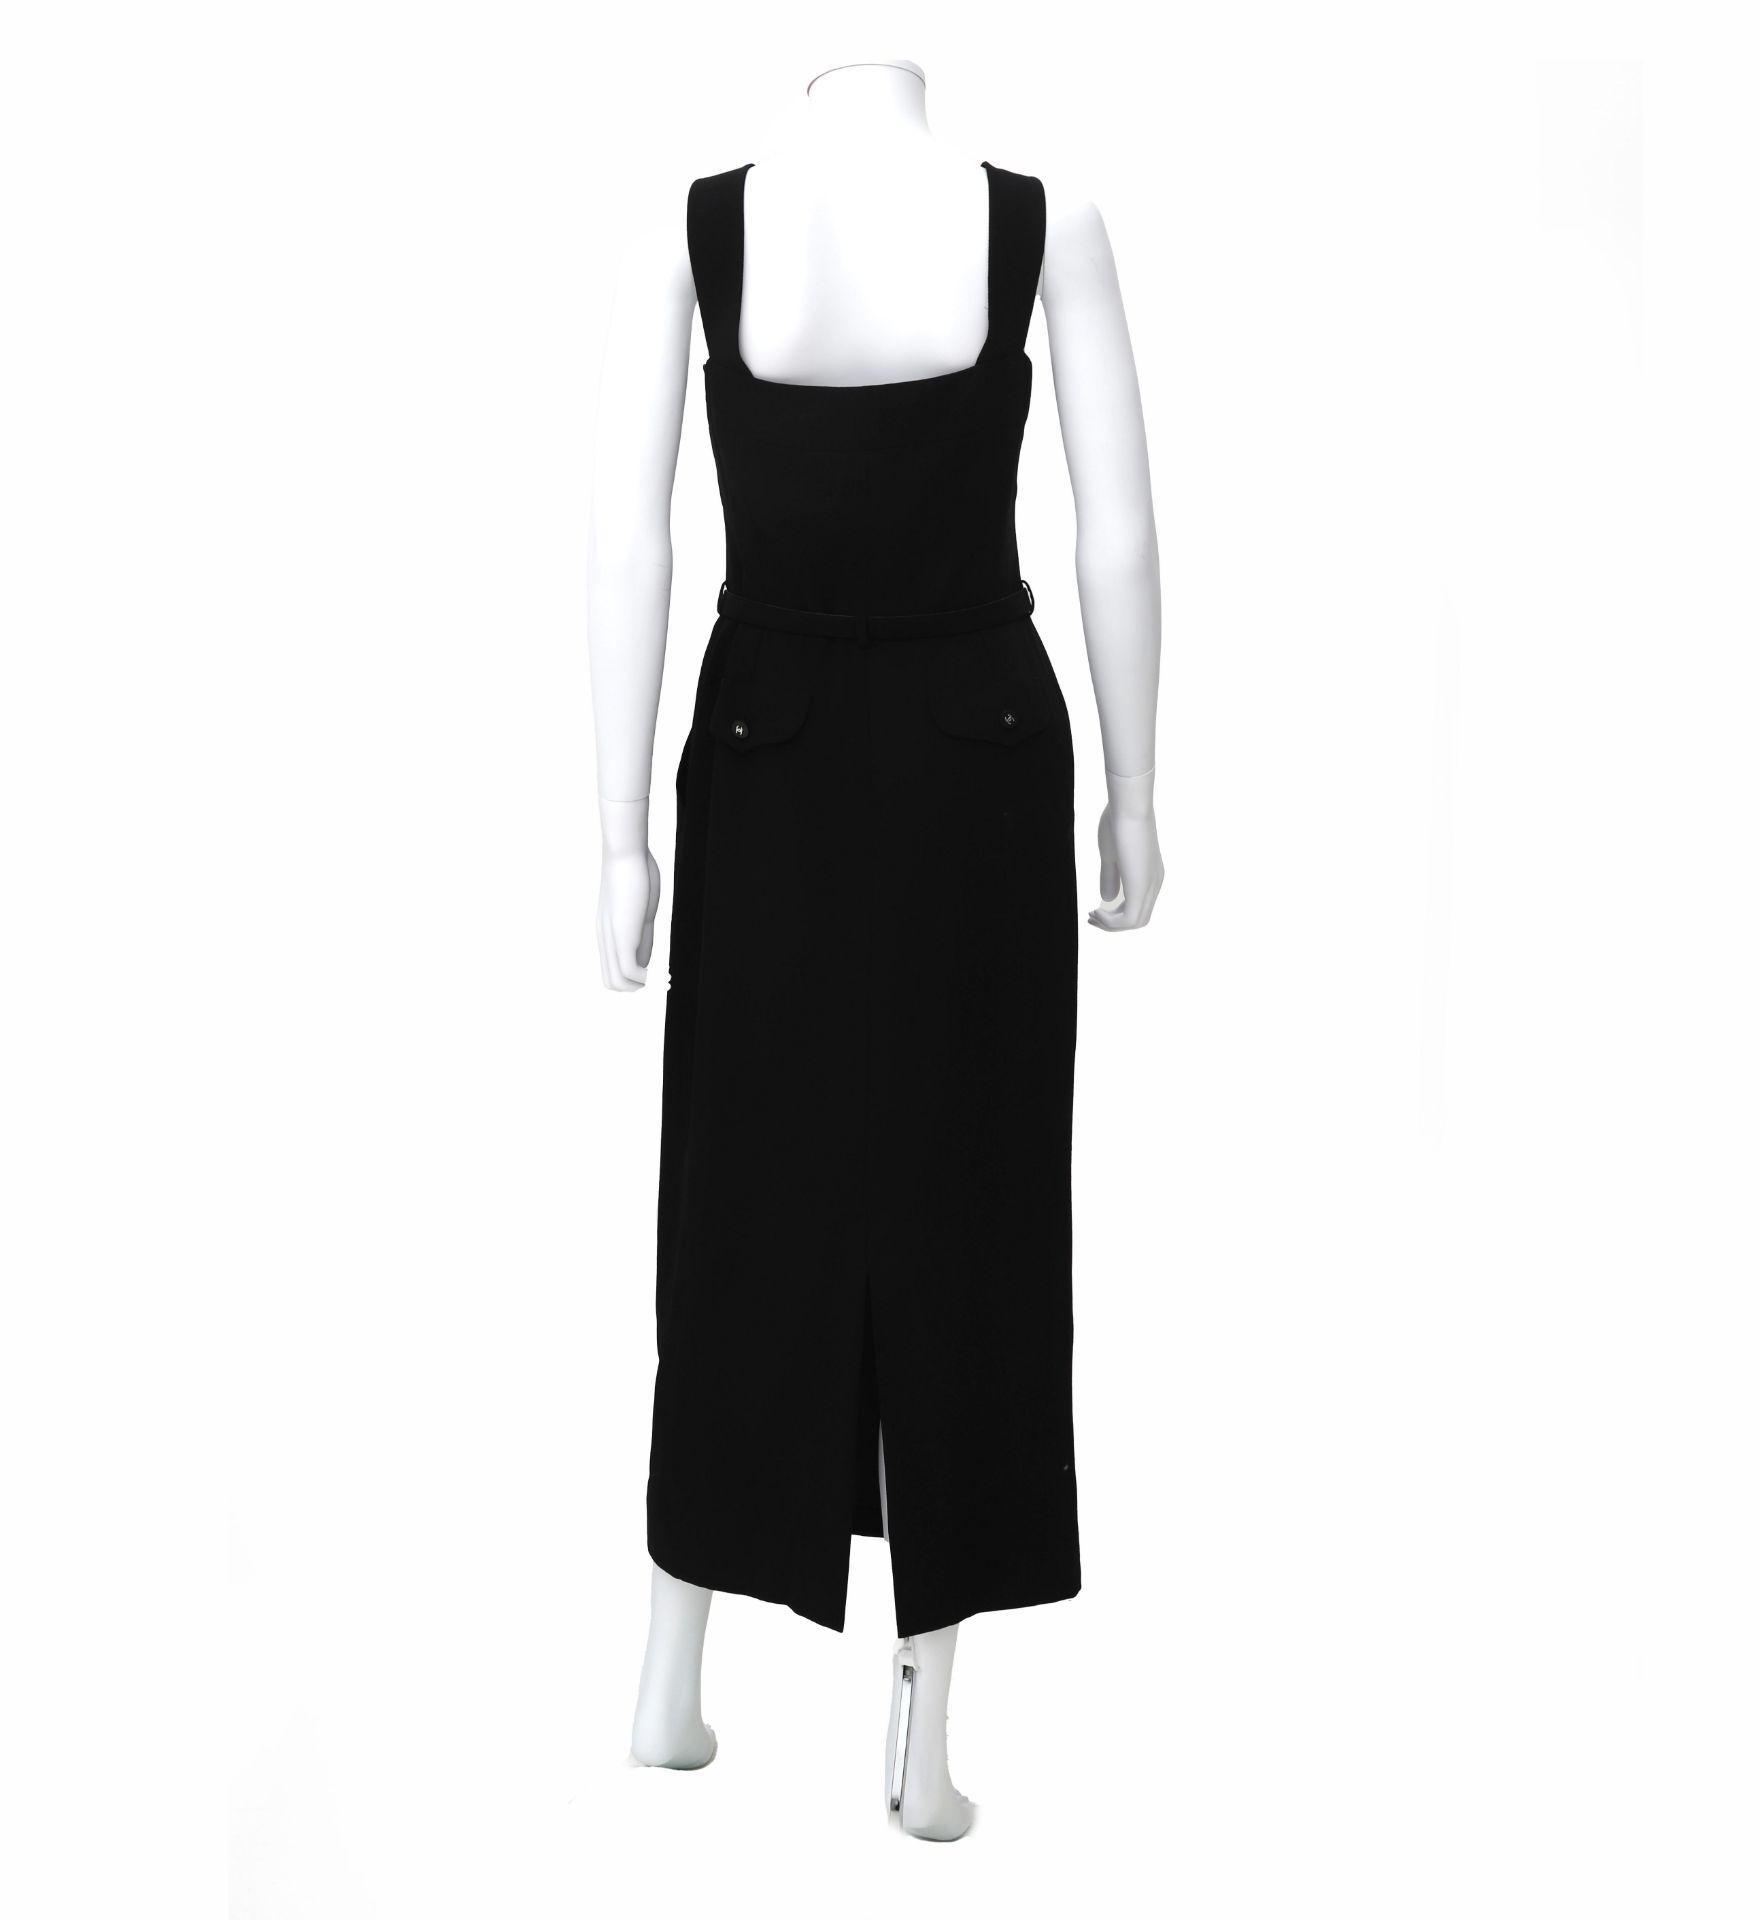 A Chanel Boutique black dress with belt. The belt has a silver-colored buckle with Chanel on it. - Bild 4 aus 6